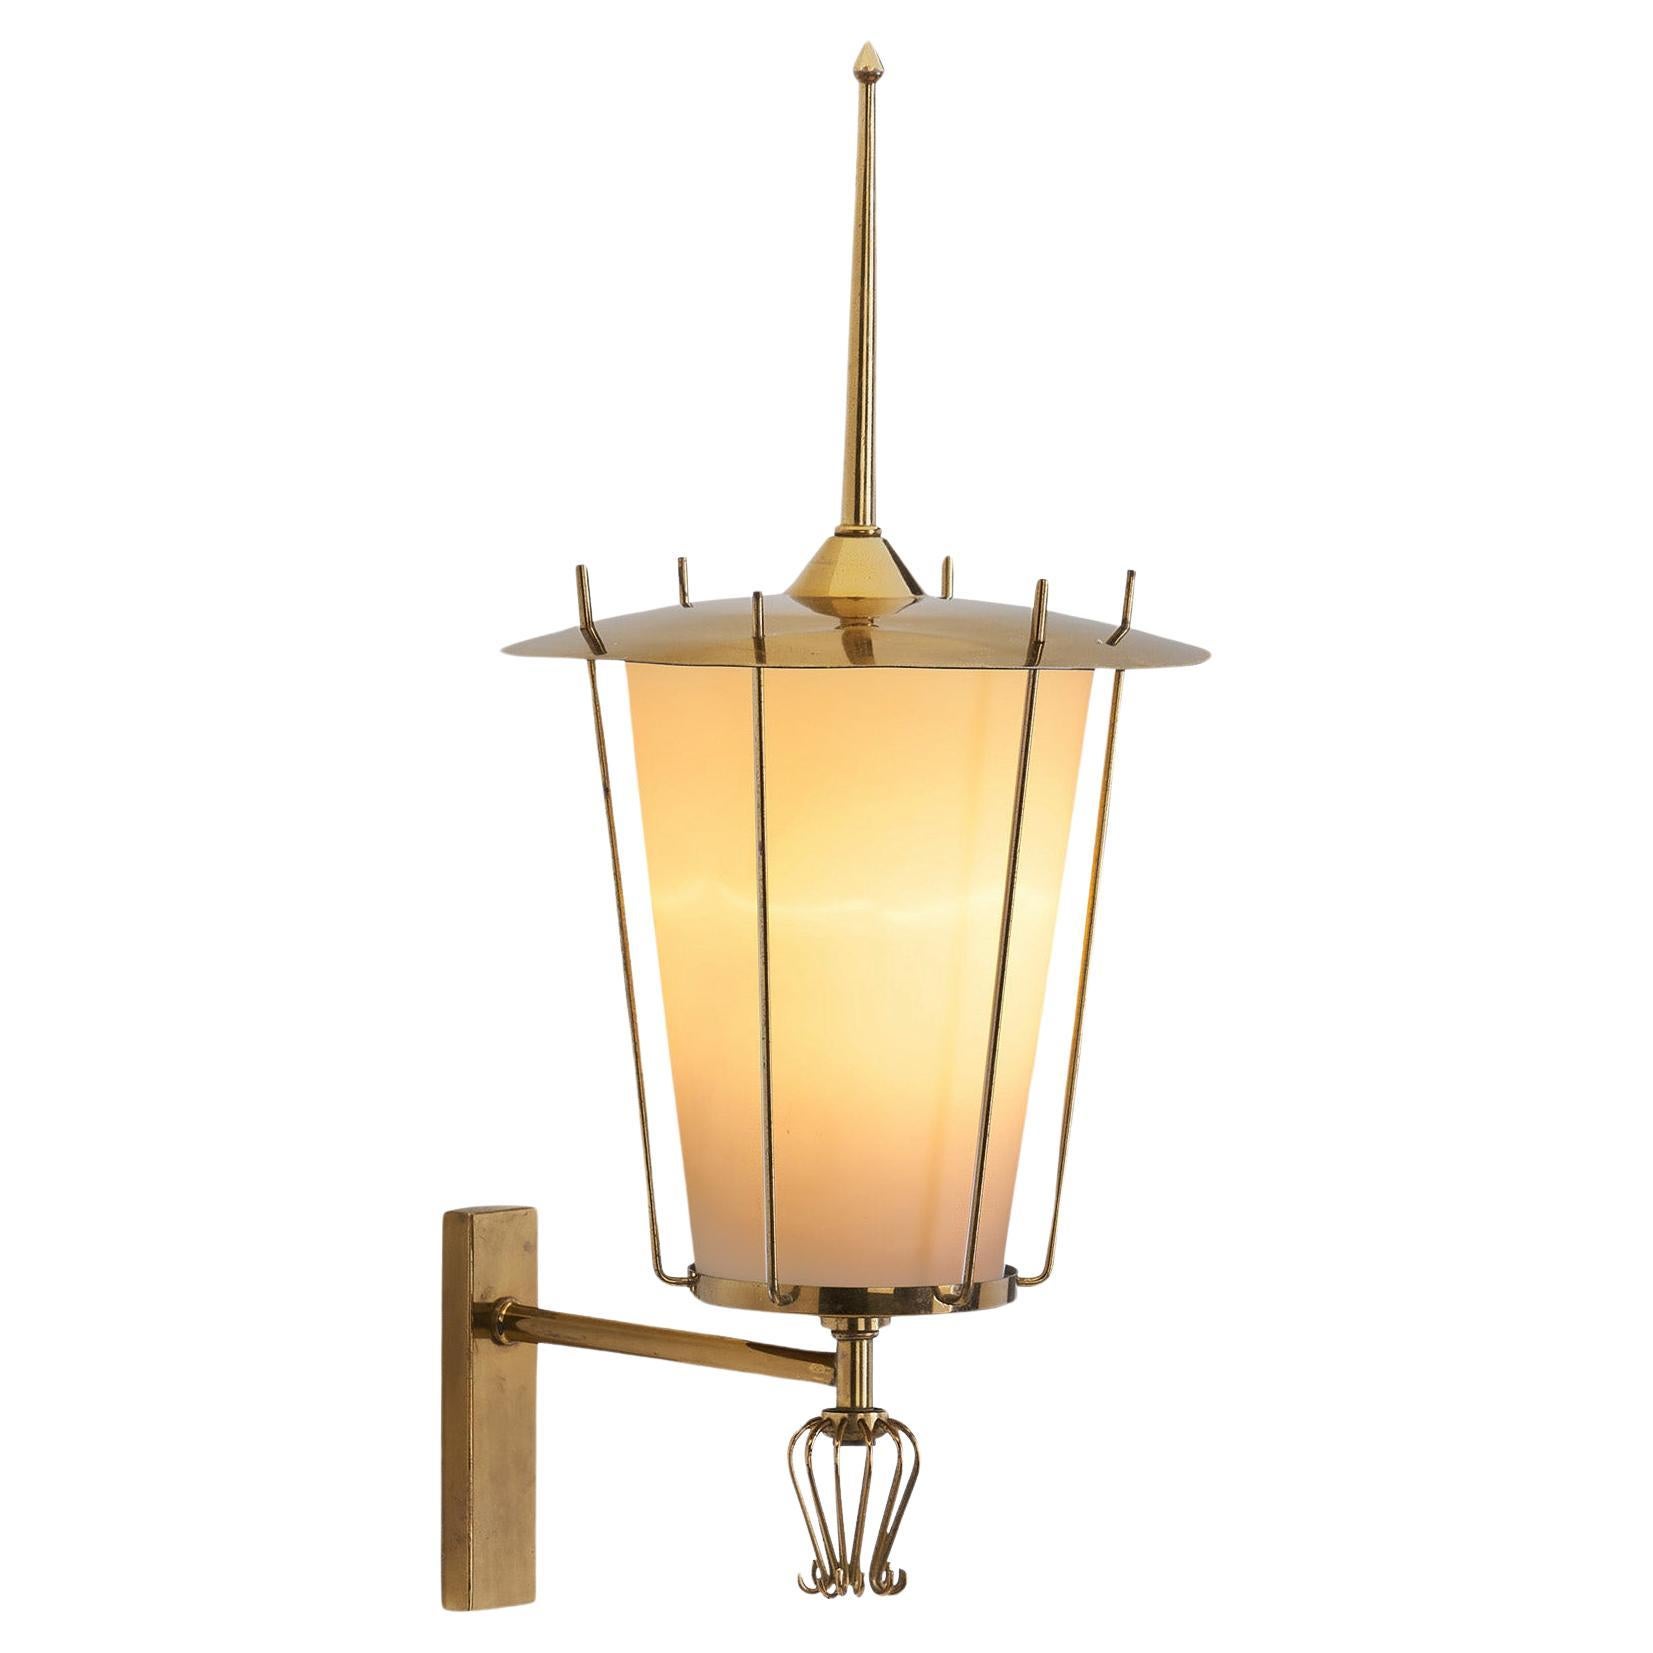 Swedish Grace Brass and Opaque Glass Wall Lamp, Sweden 1930s